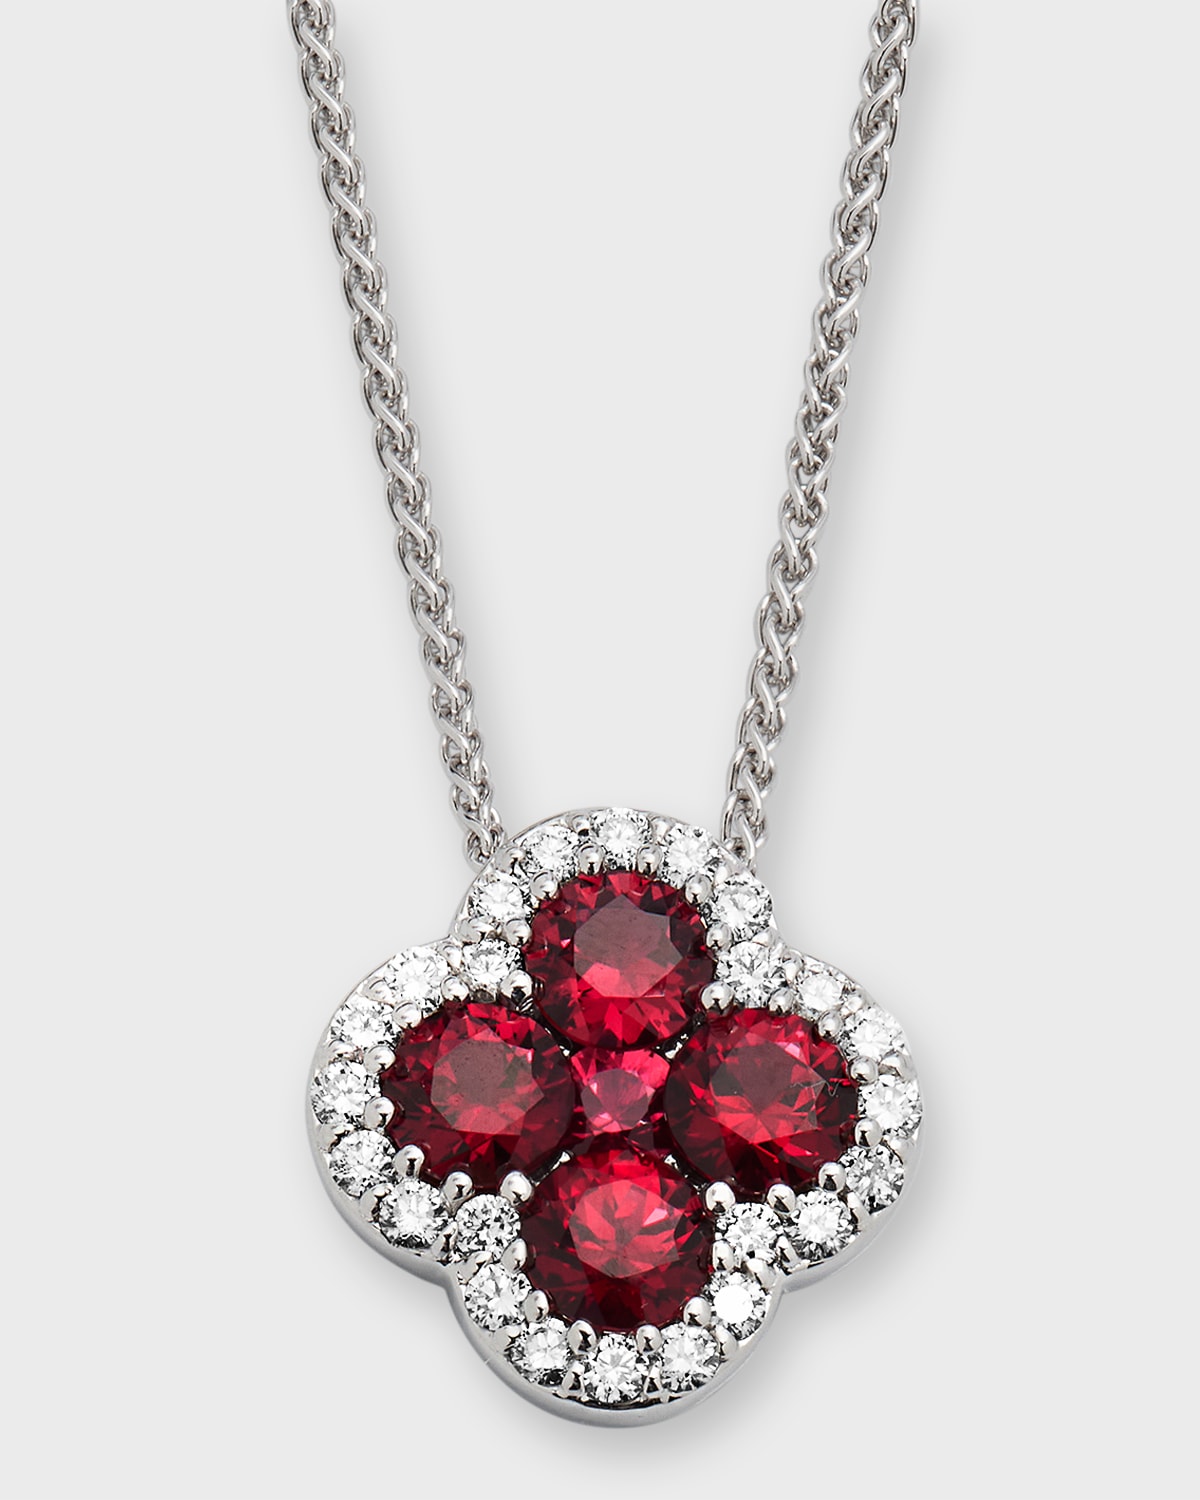 18k White Gold Diamond and Ruby Pendant Necklace